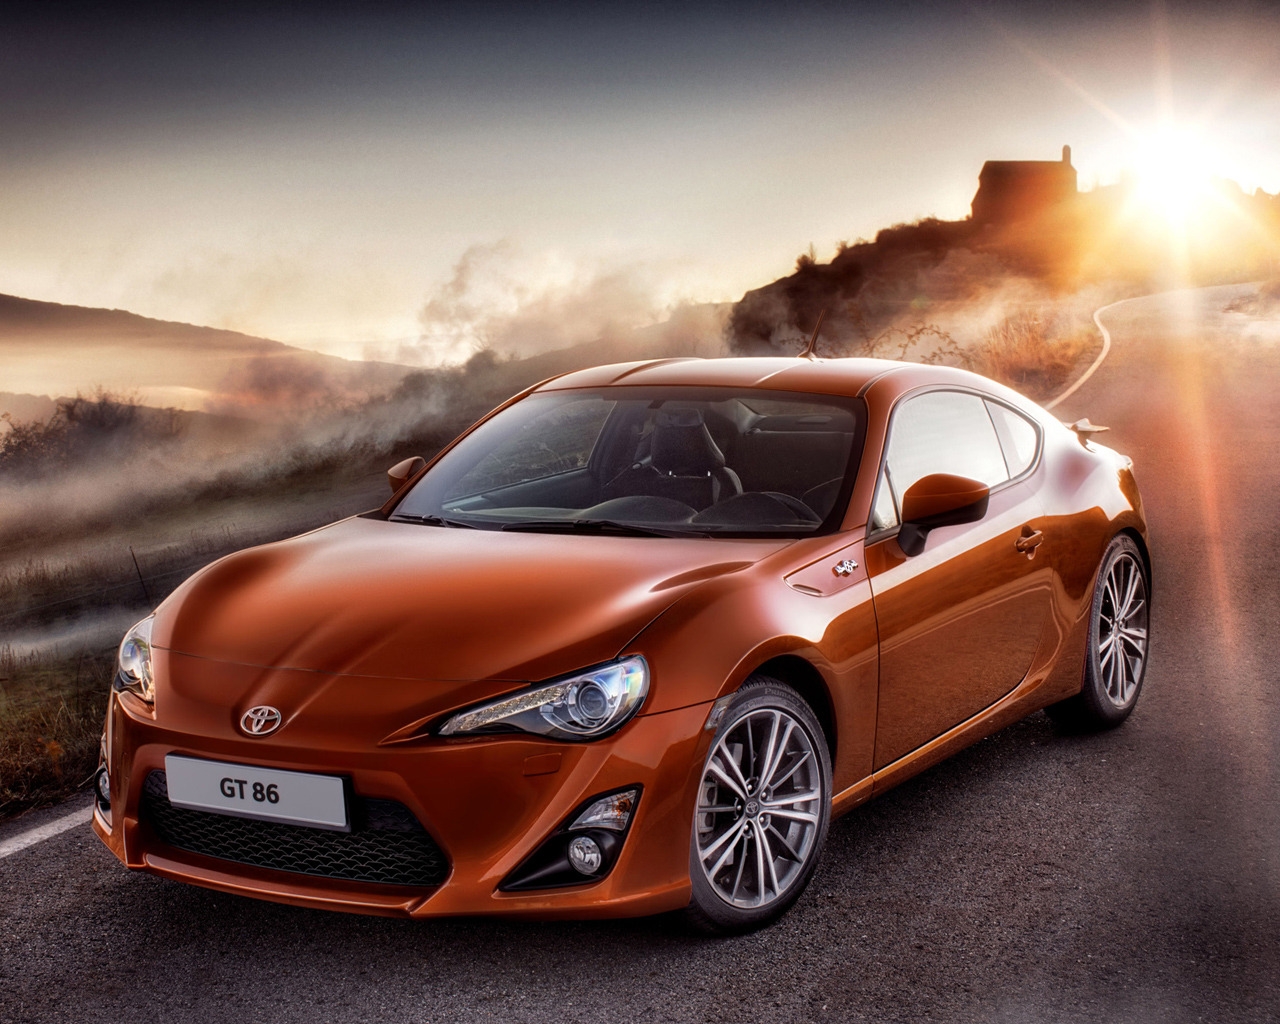 Amazing Toyota GT 86 for 1280 x 1024 resolution